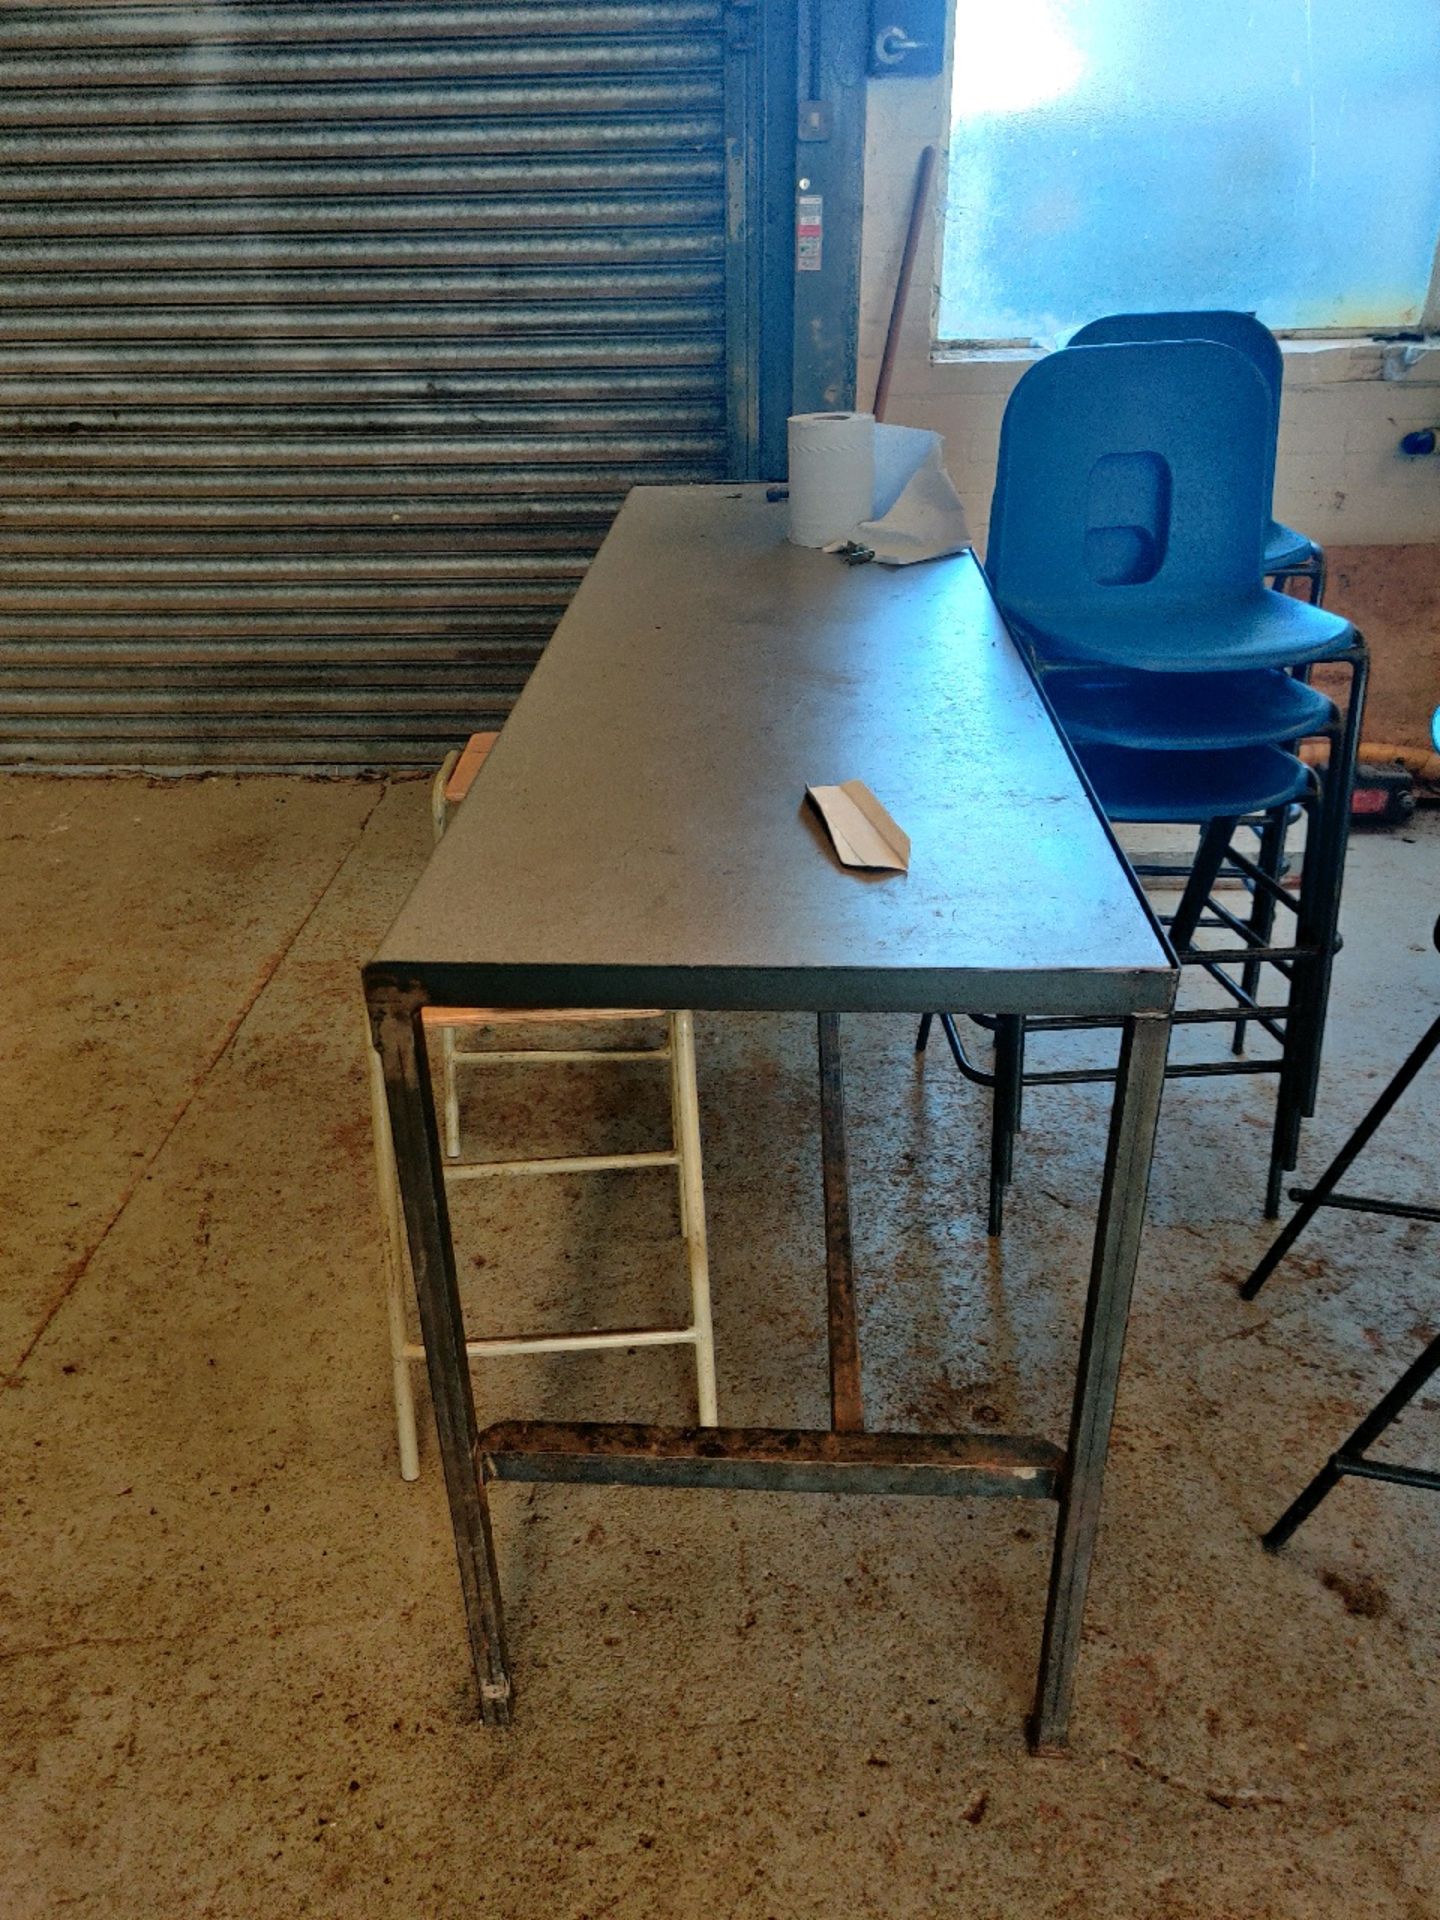 Work benches - Image 3 of 3